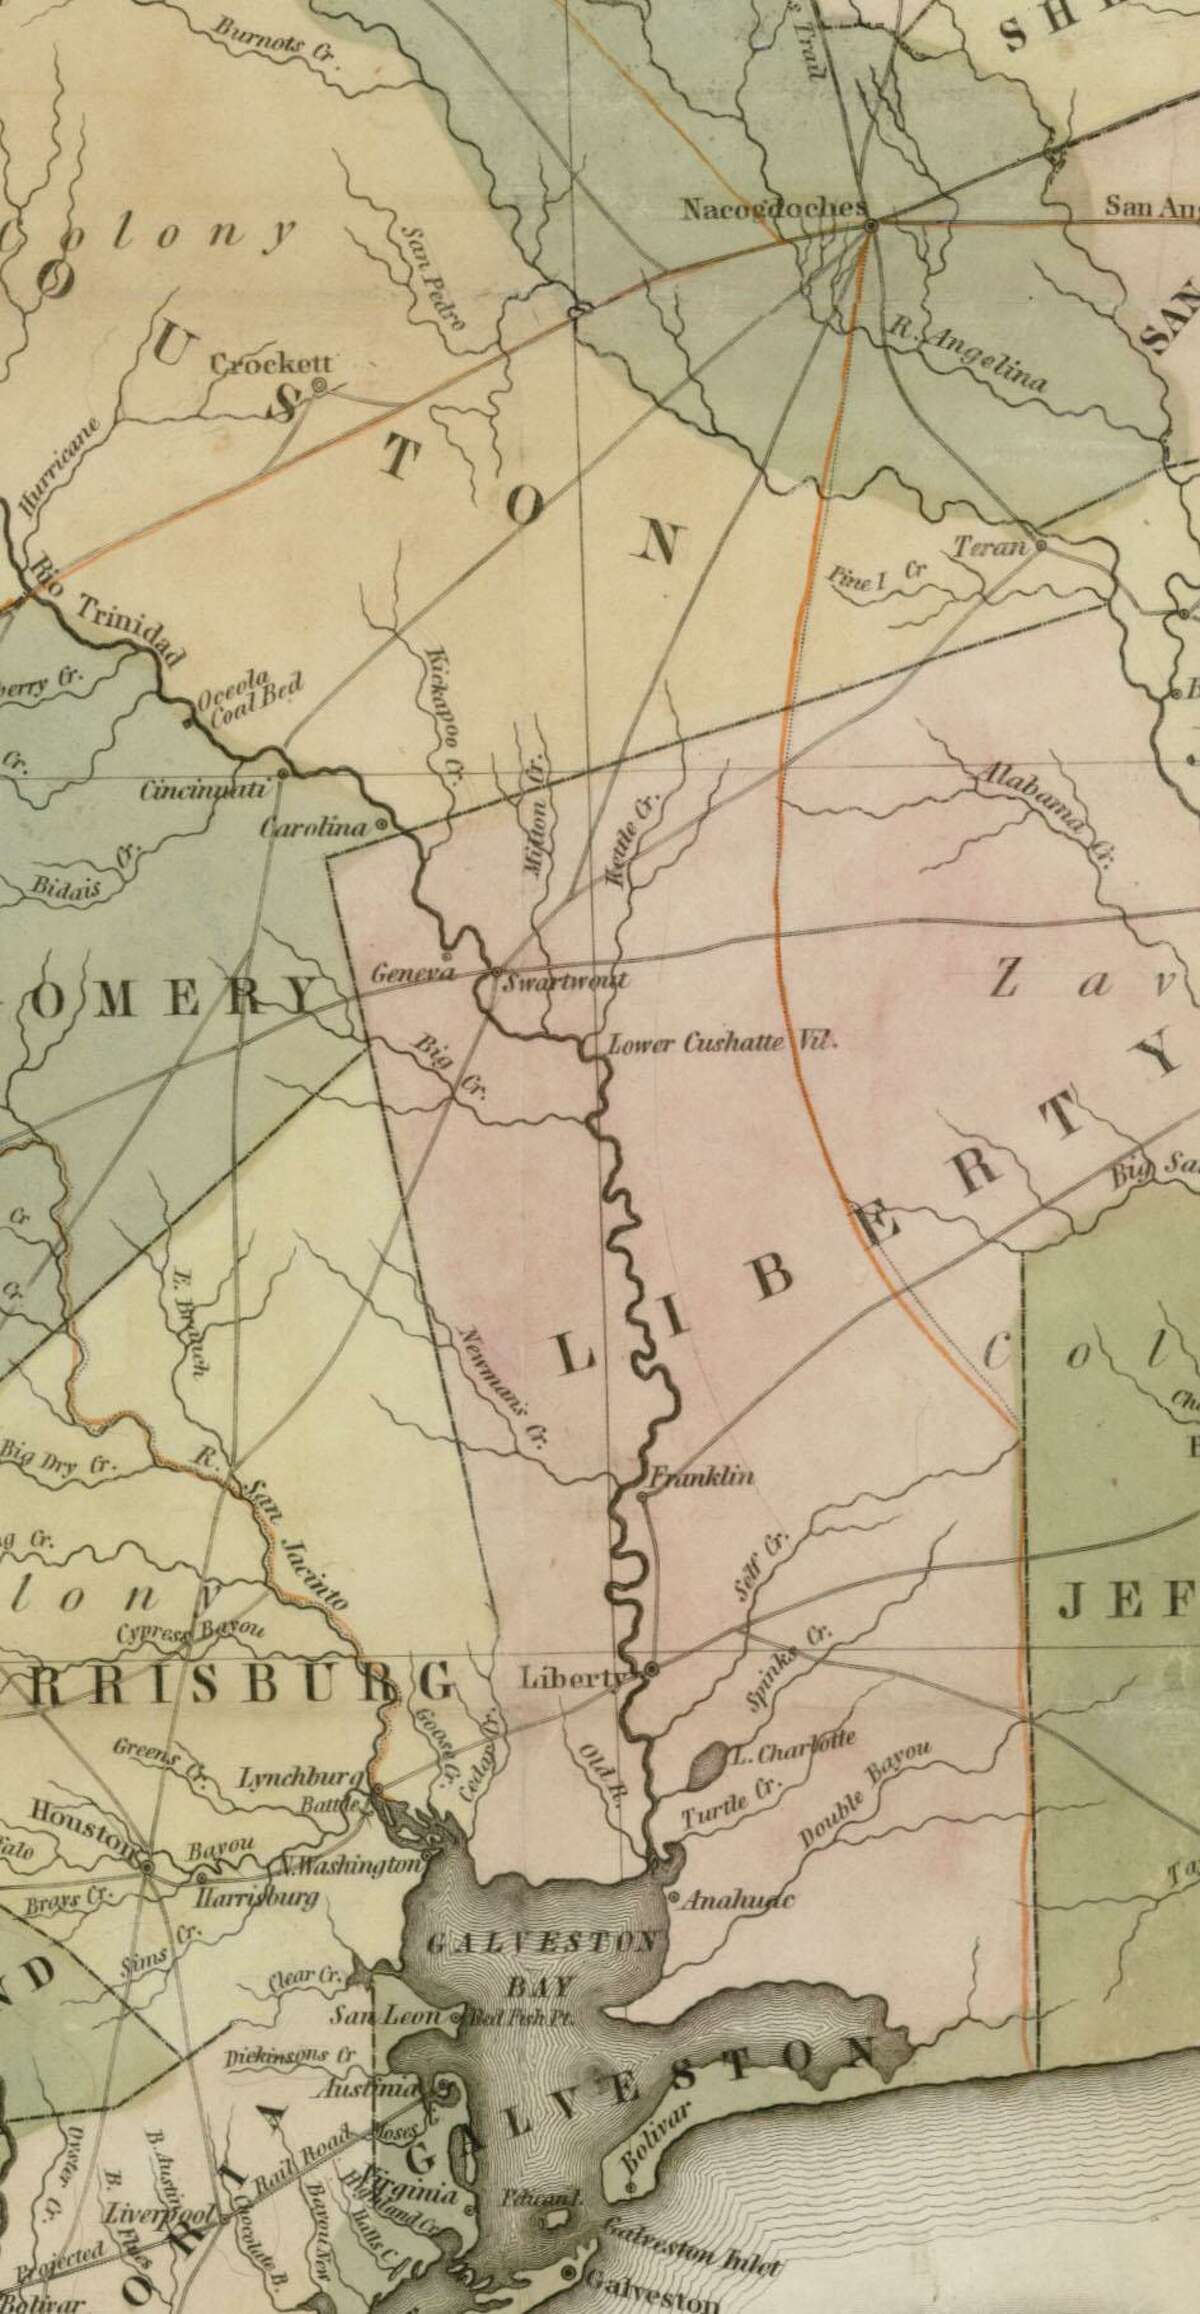 Houston and Nacogdoches are shown as major hubs of transportation in the 1839 Texas map.